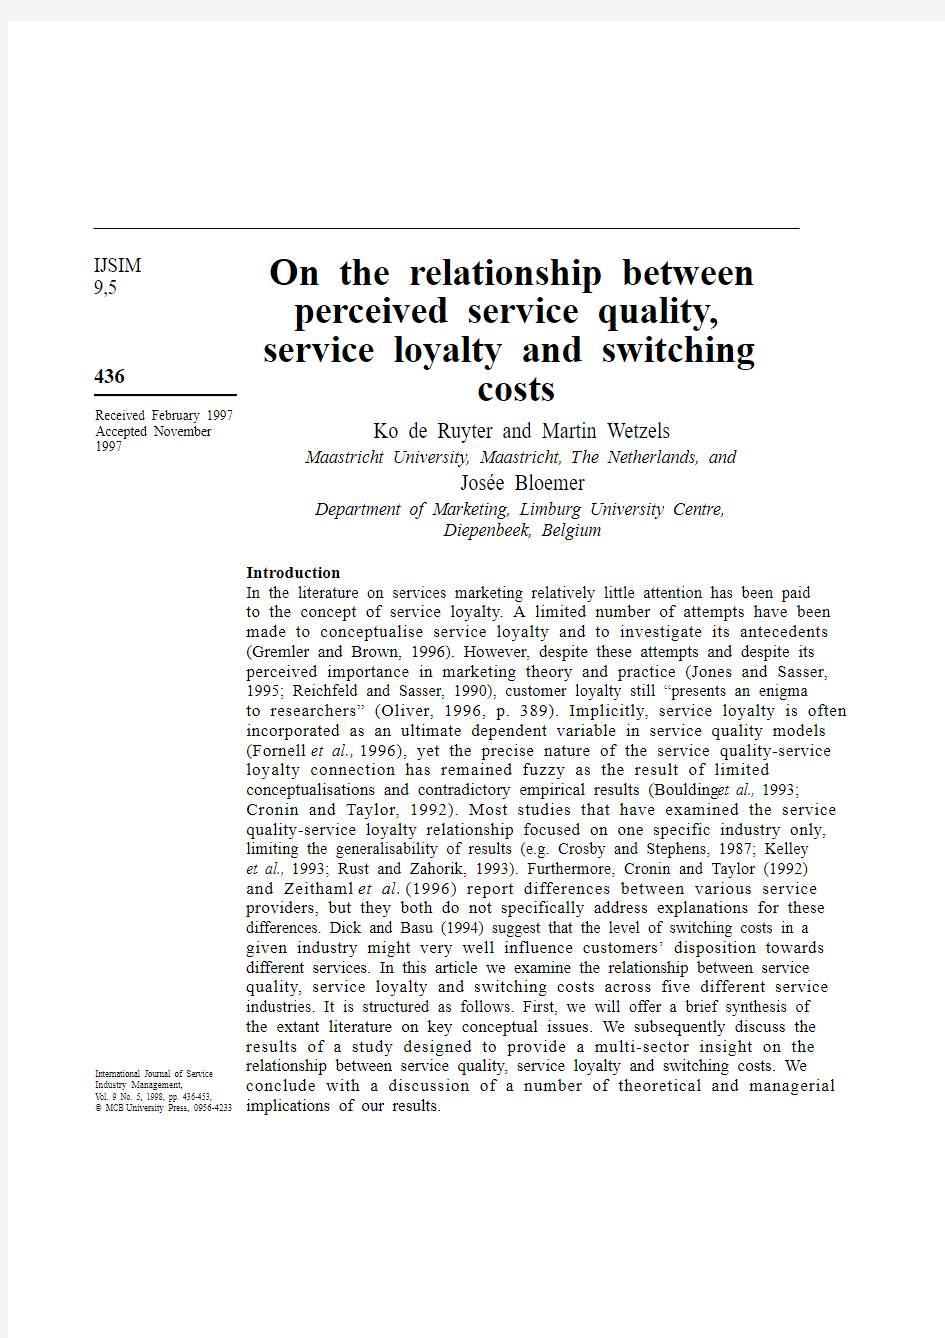 On the relationship between perceived service quality, servi